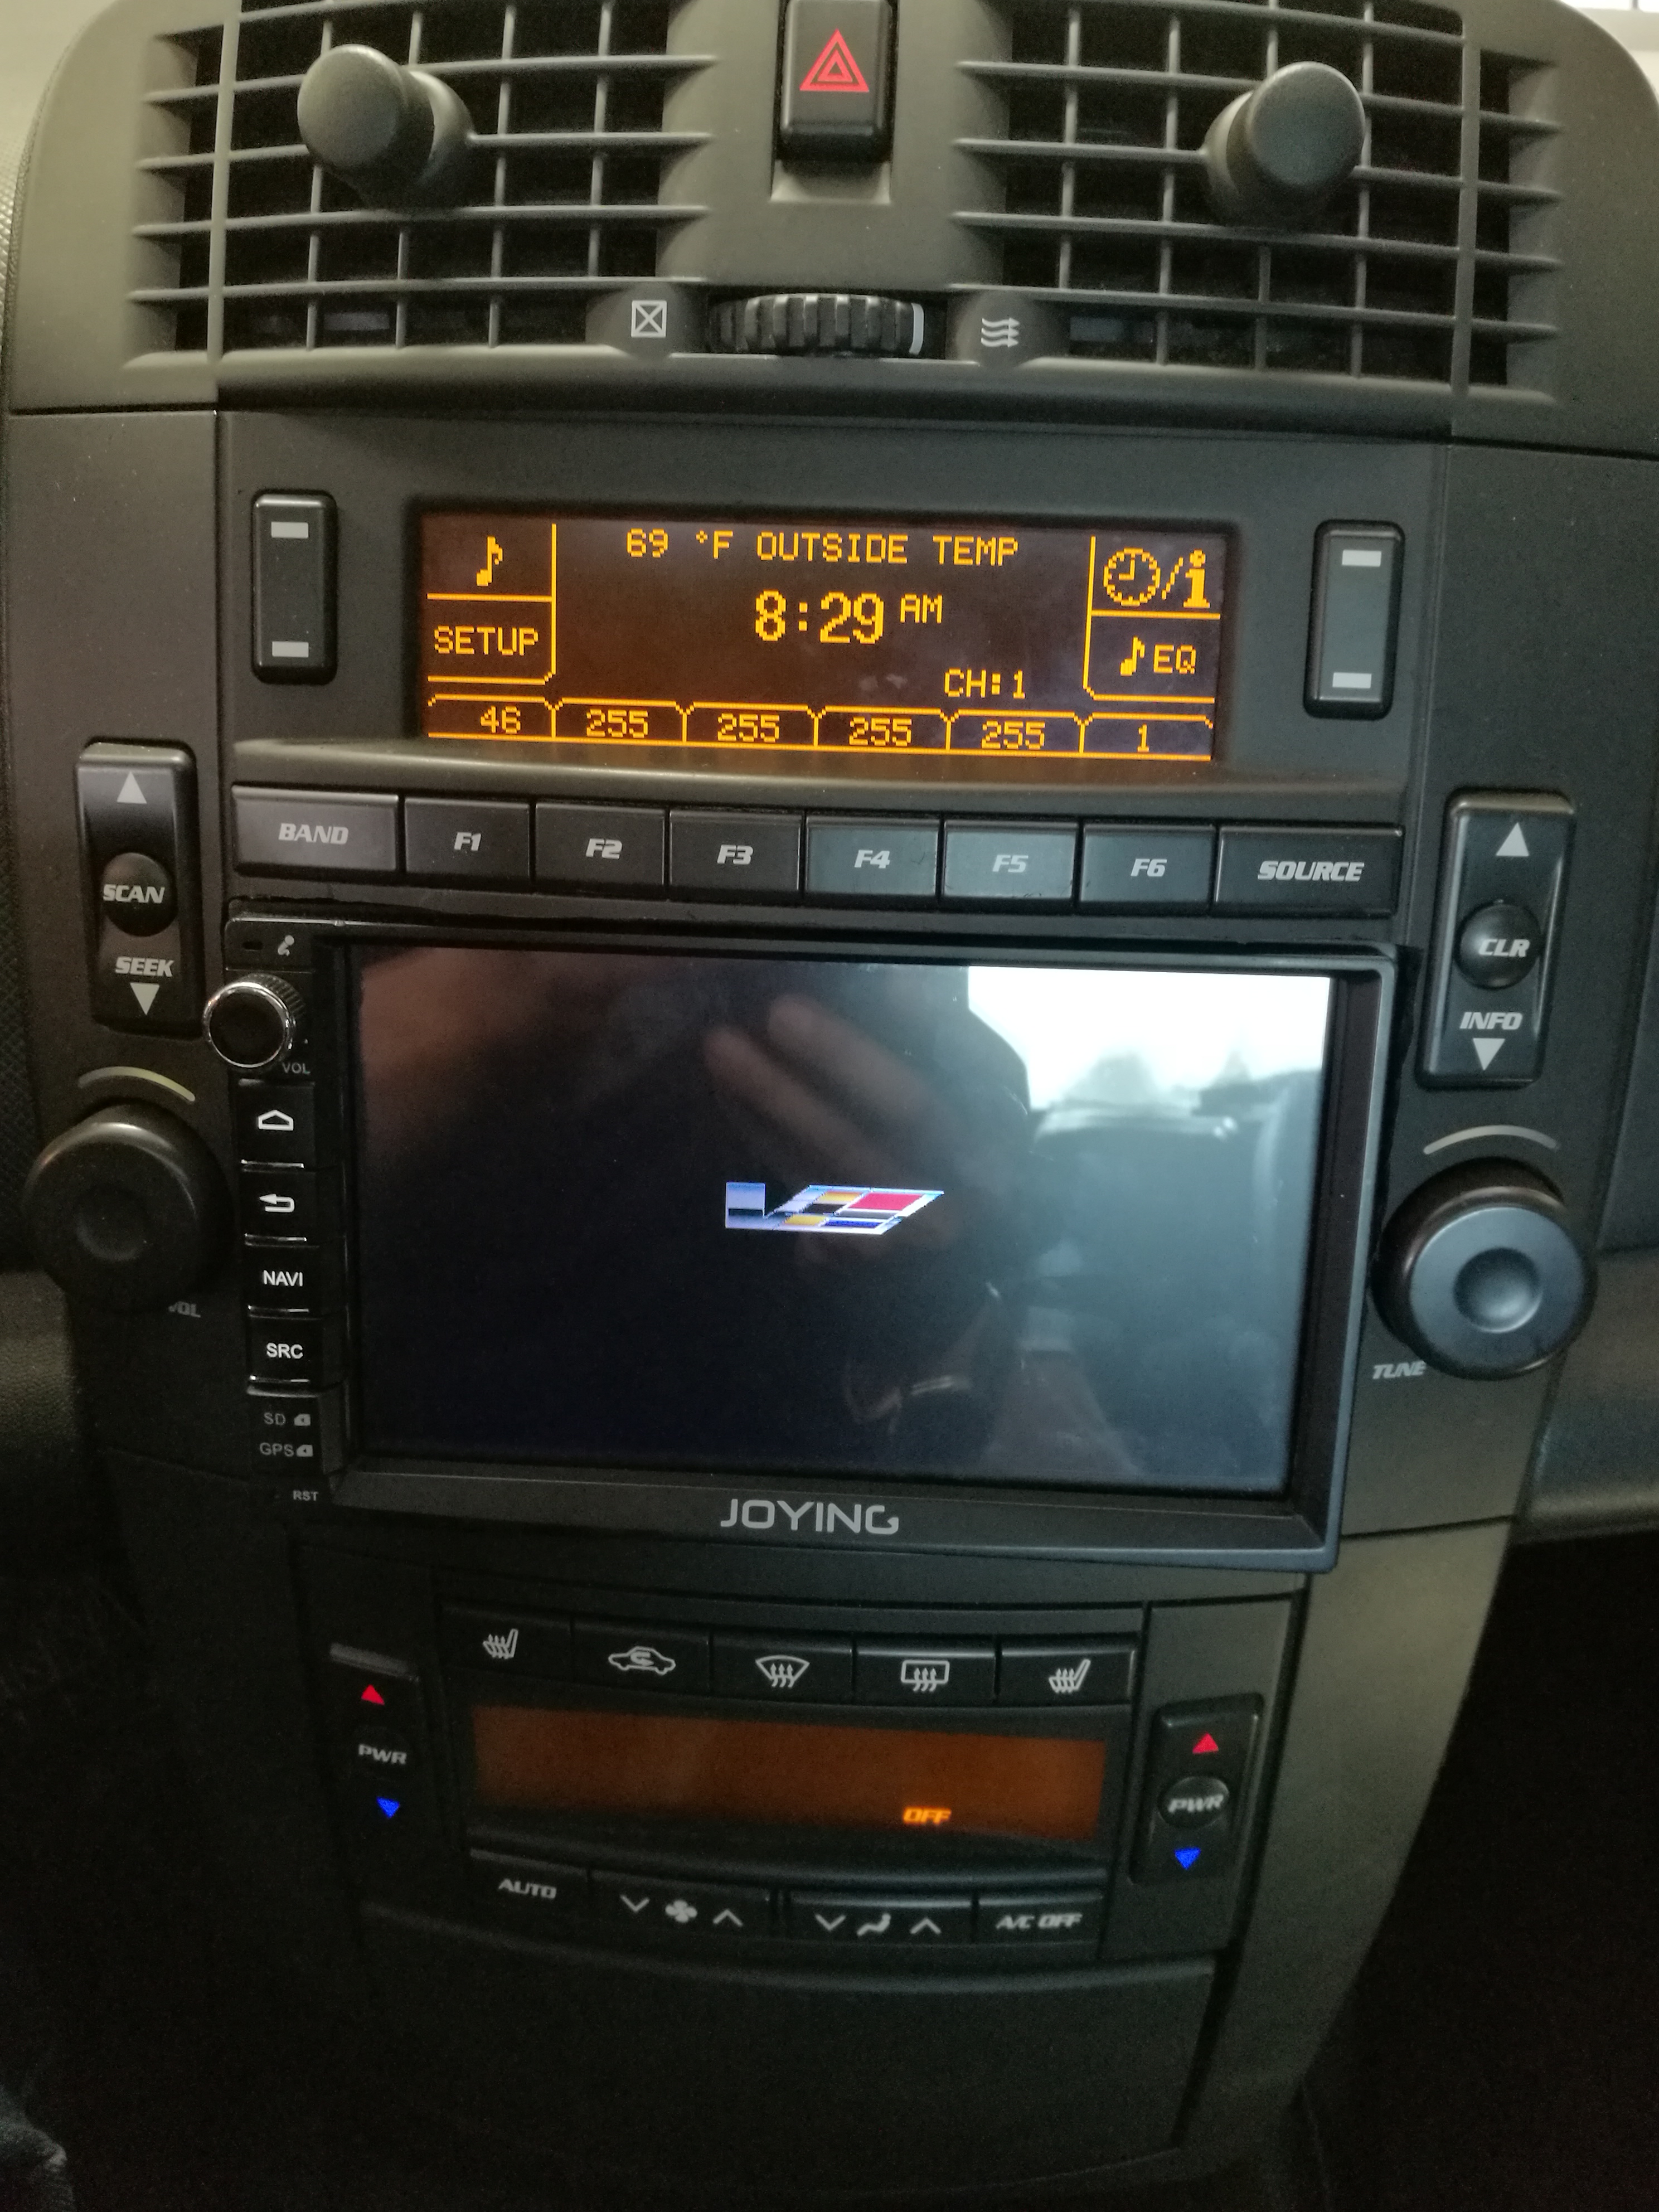 Chinese Android Double DIN Head Unit w/ Retained DIC - LS1TECH - Camaro and  Firebird Forum Discussion